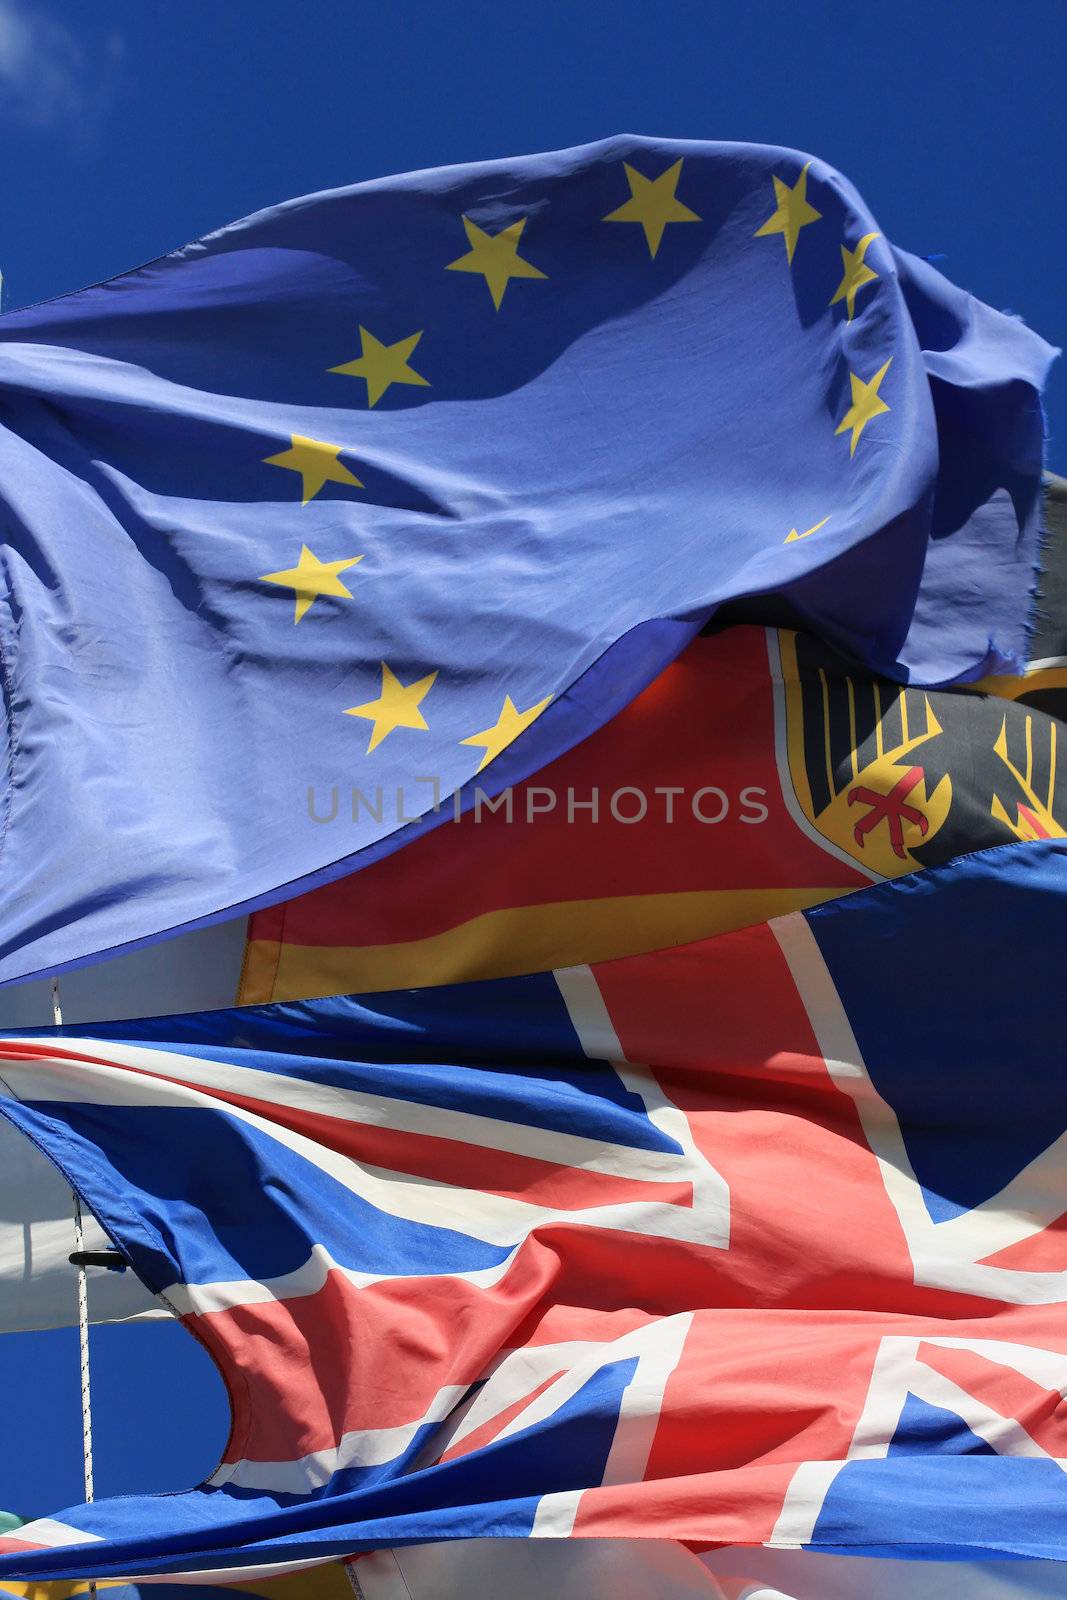 The national flags of UK and Germany along with the European Union flag all flying together, thight shot. Fantastic generic image for anything regarding the EU, UK, Germany or anything European